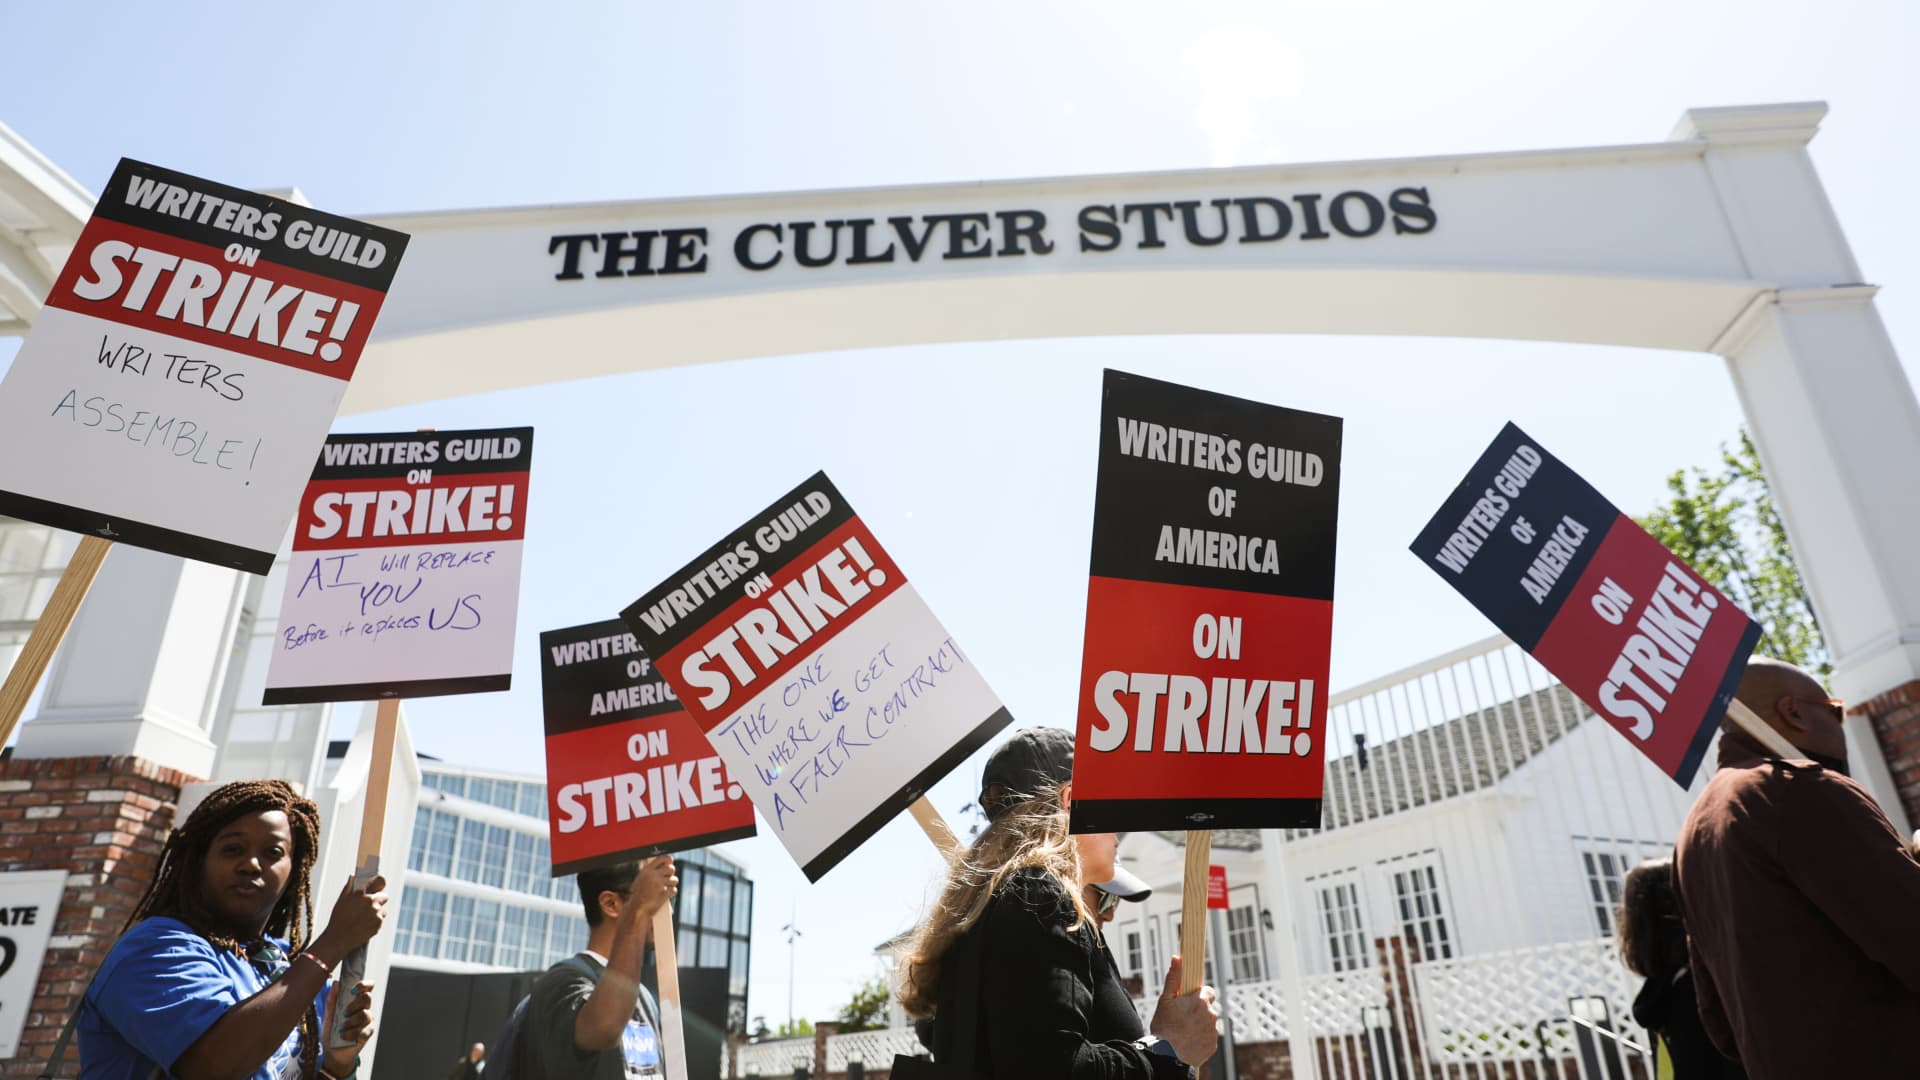 Hollywood writers and studios reach tentative deal to end strike after nearly 150 days